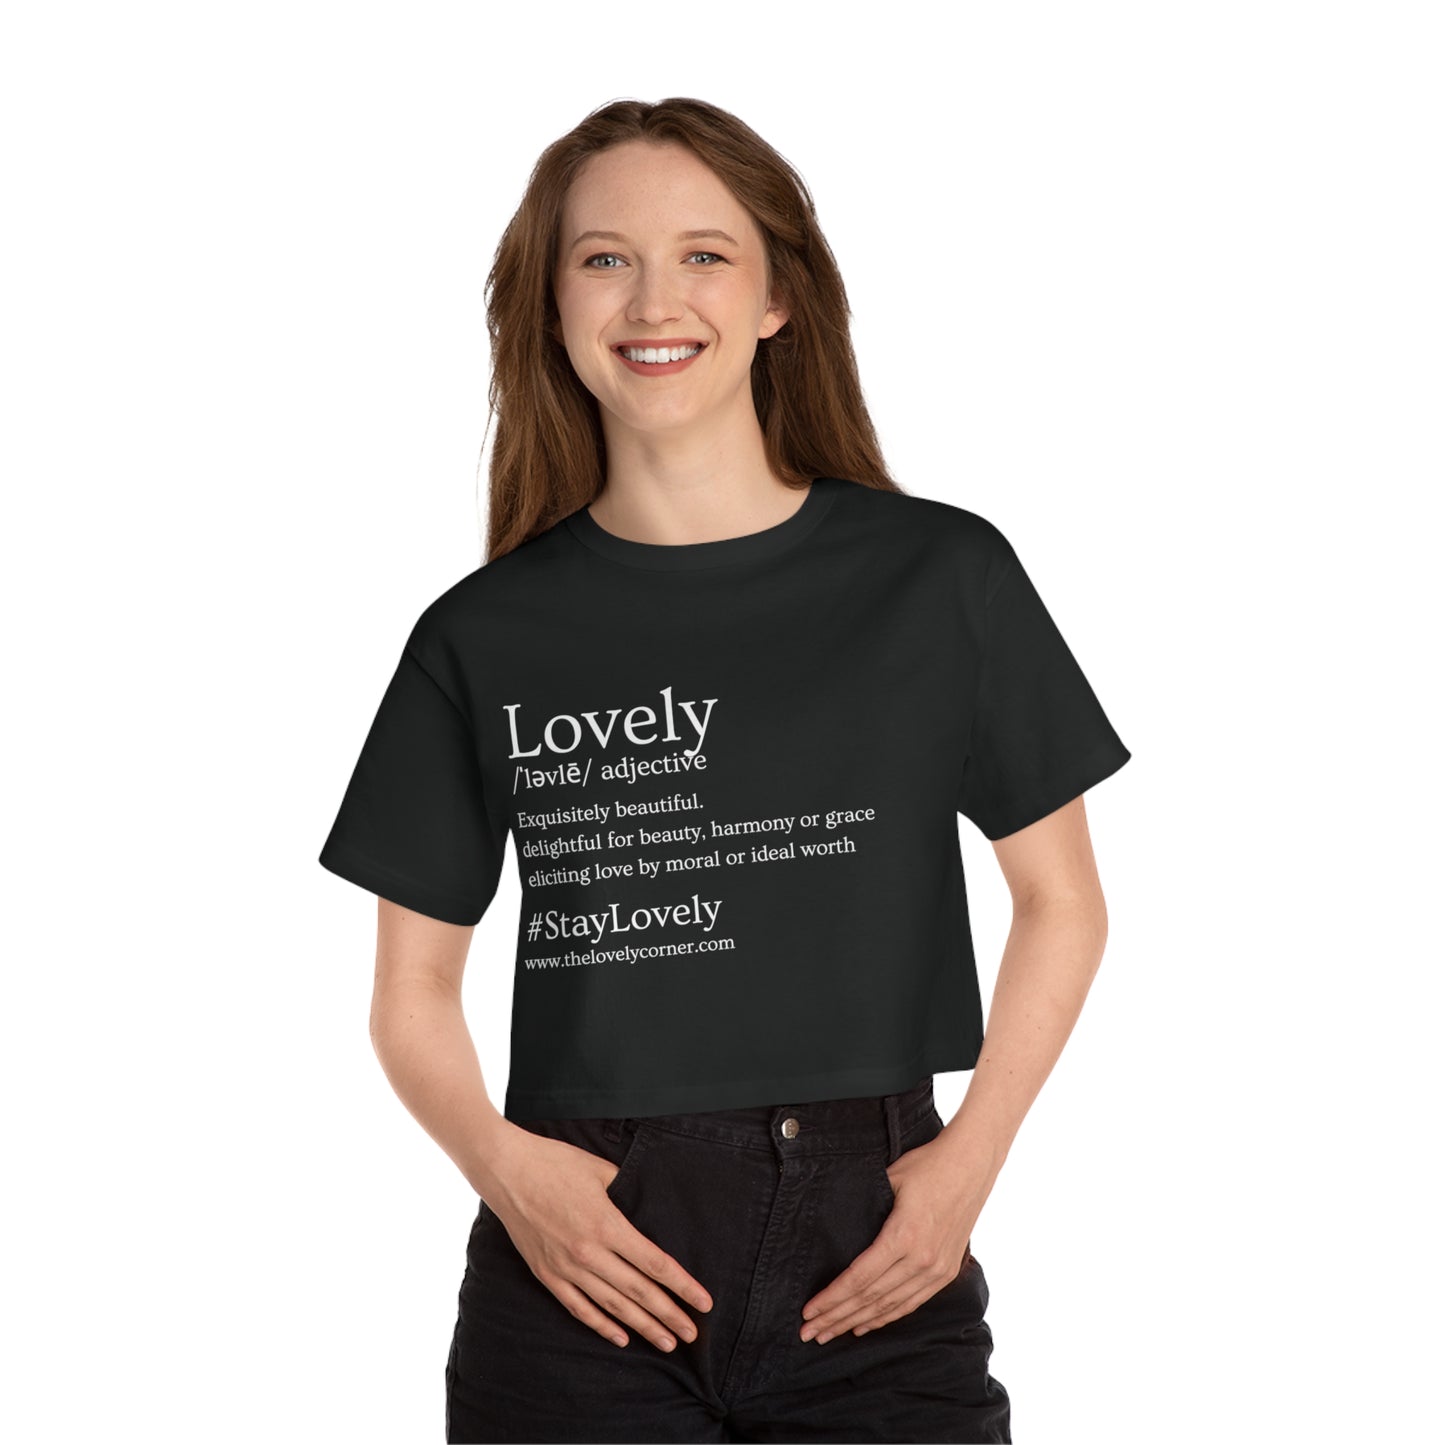 Women's Lovely Cropped T-Shirt